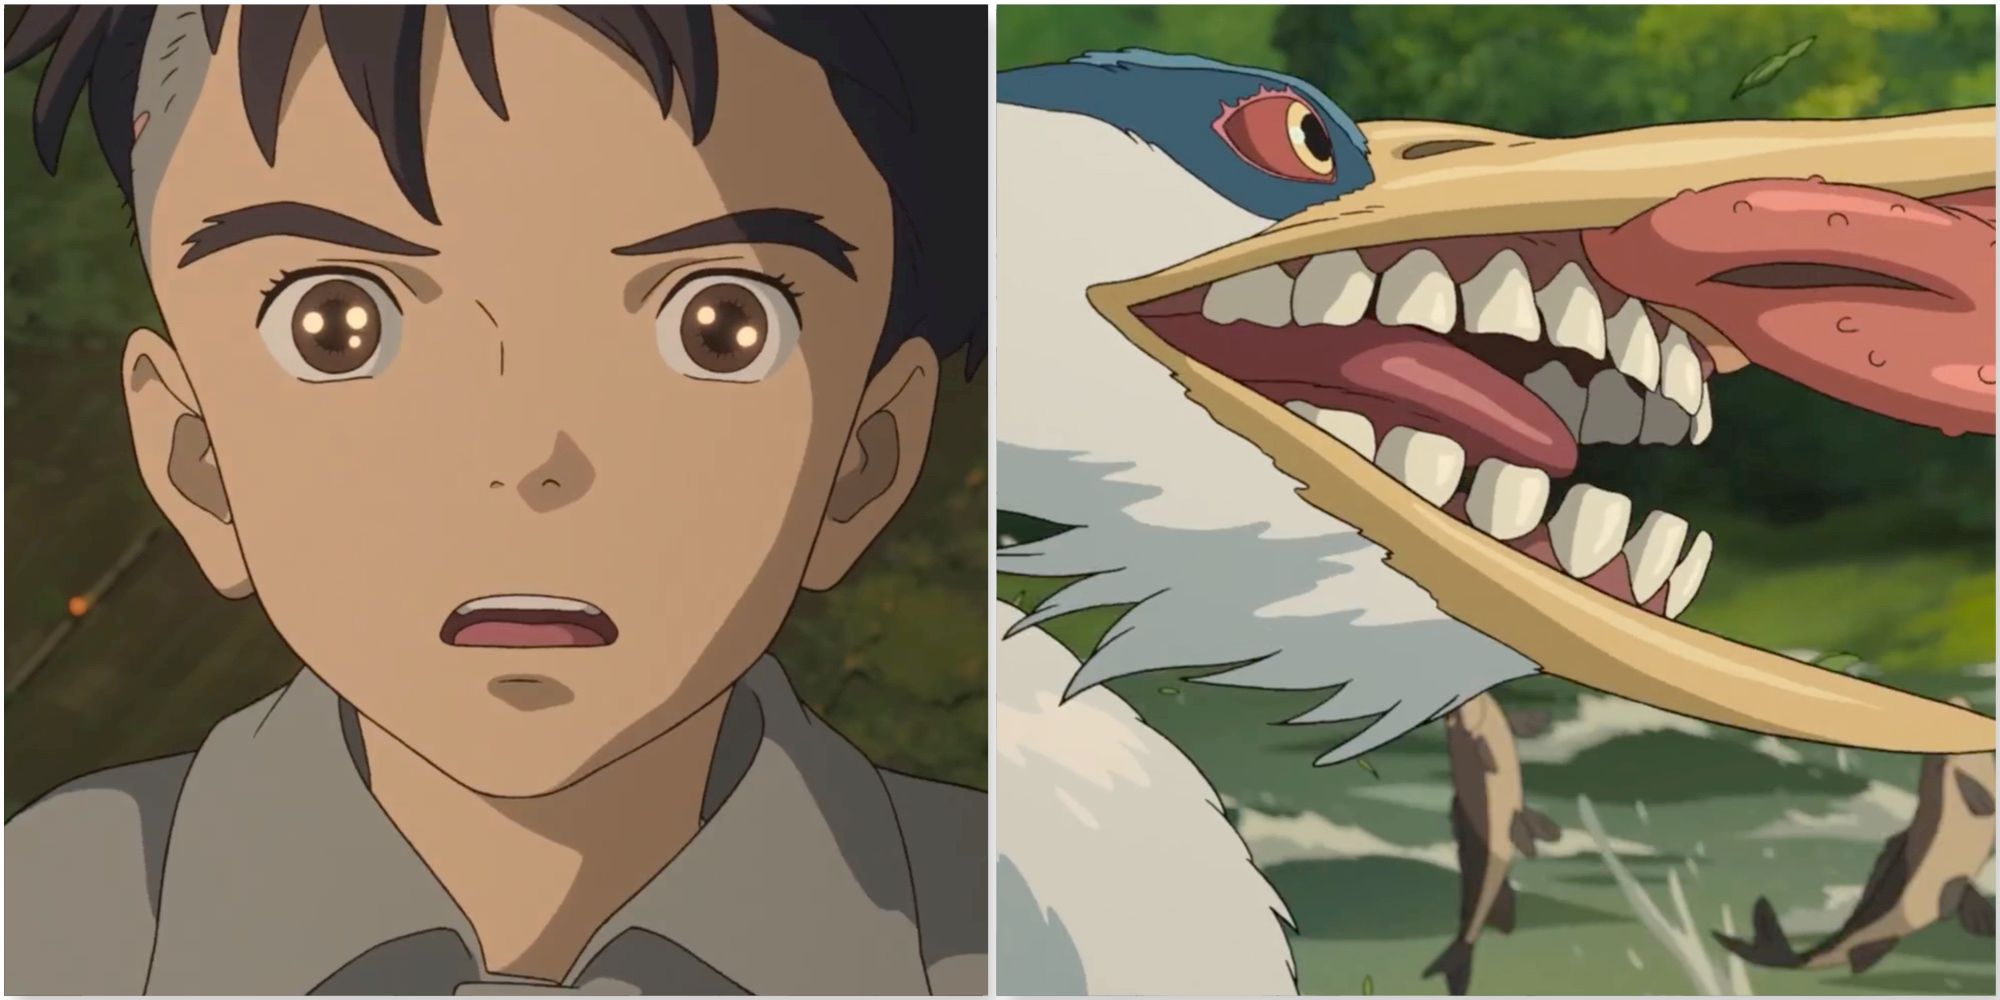 Mahito and The Gray Heron in The Boy and the Heron